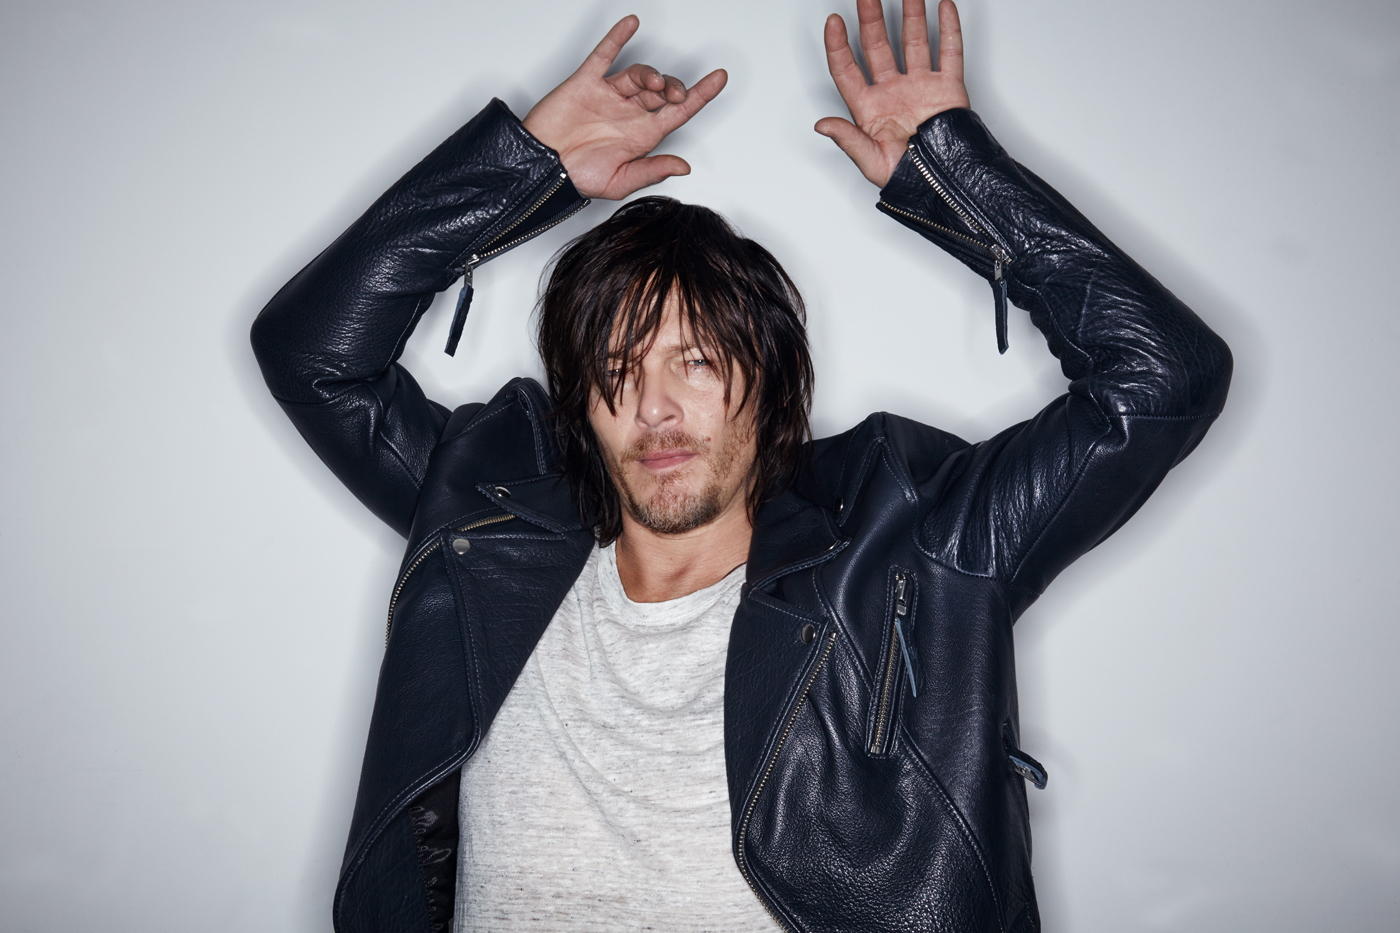 &amp;#39;The Walking Dead&amp;#39; Star Norman Reedus Shoots with Imagista